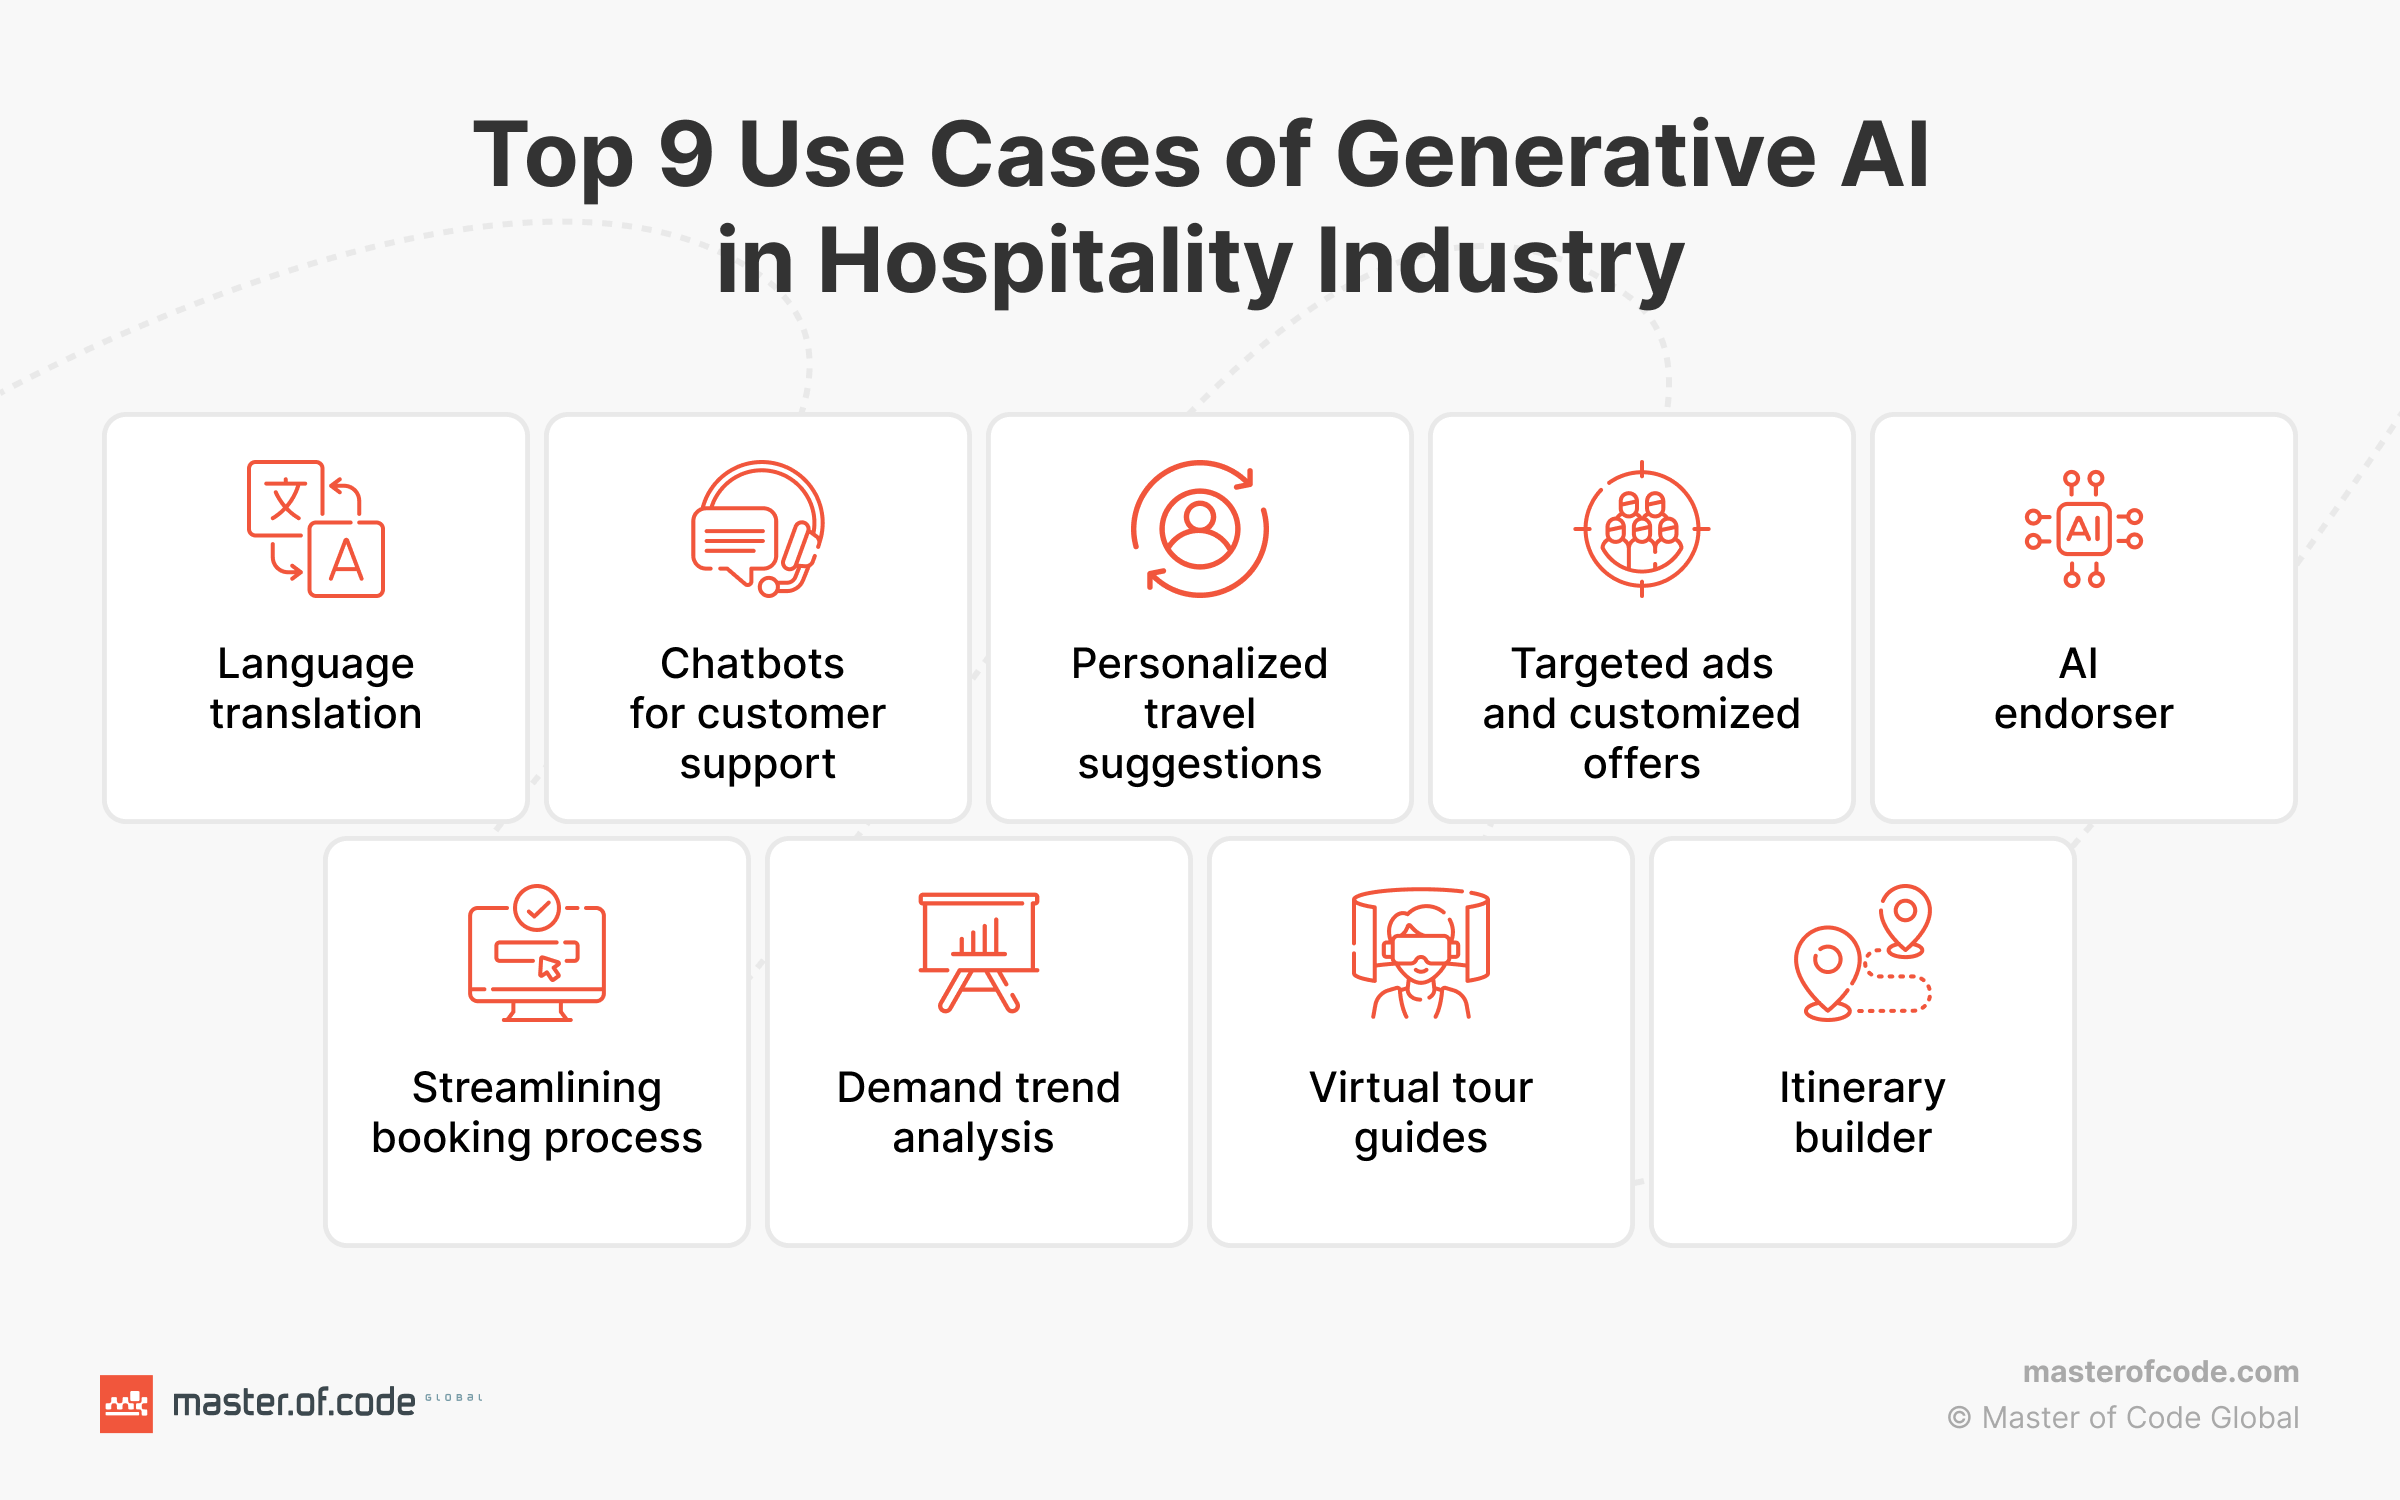 Generative AI Uses Cases in Hospitality